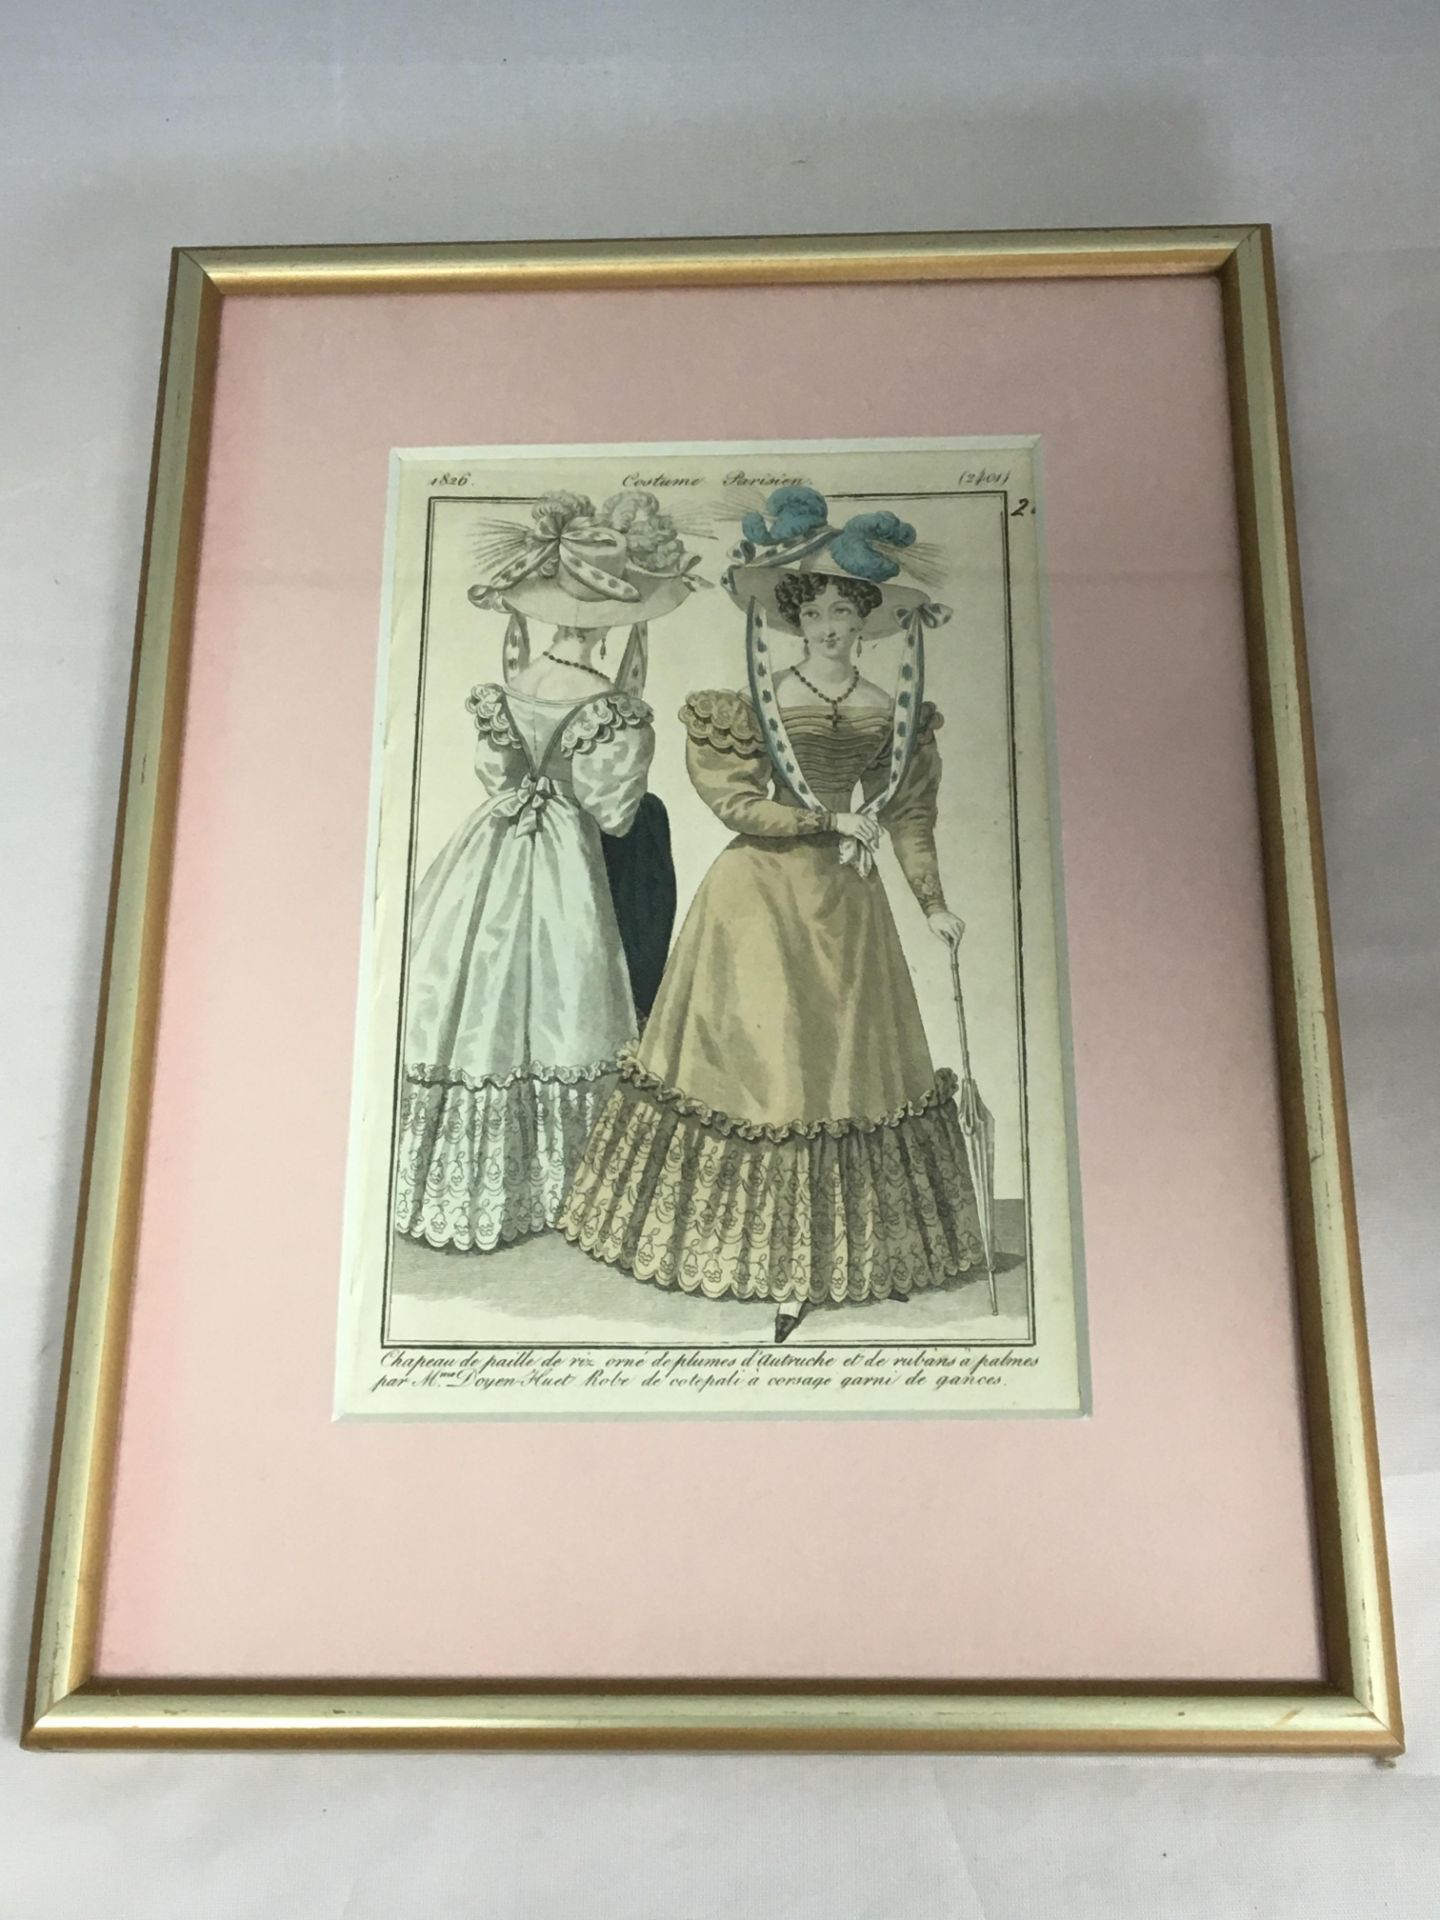 19th CENTURY FRENCH FASHION PRINT - COSTUMES PARISIENS - PLATE NUMBER 2387 - 1826 - FRAMED AND